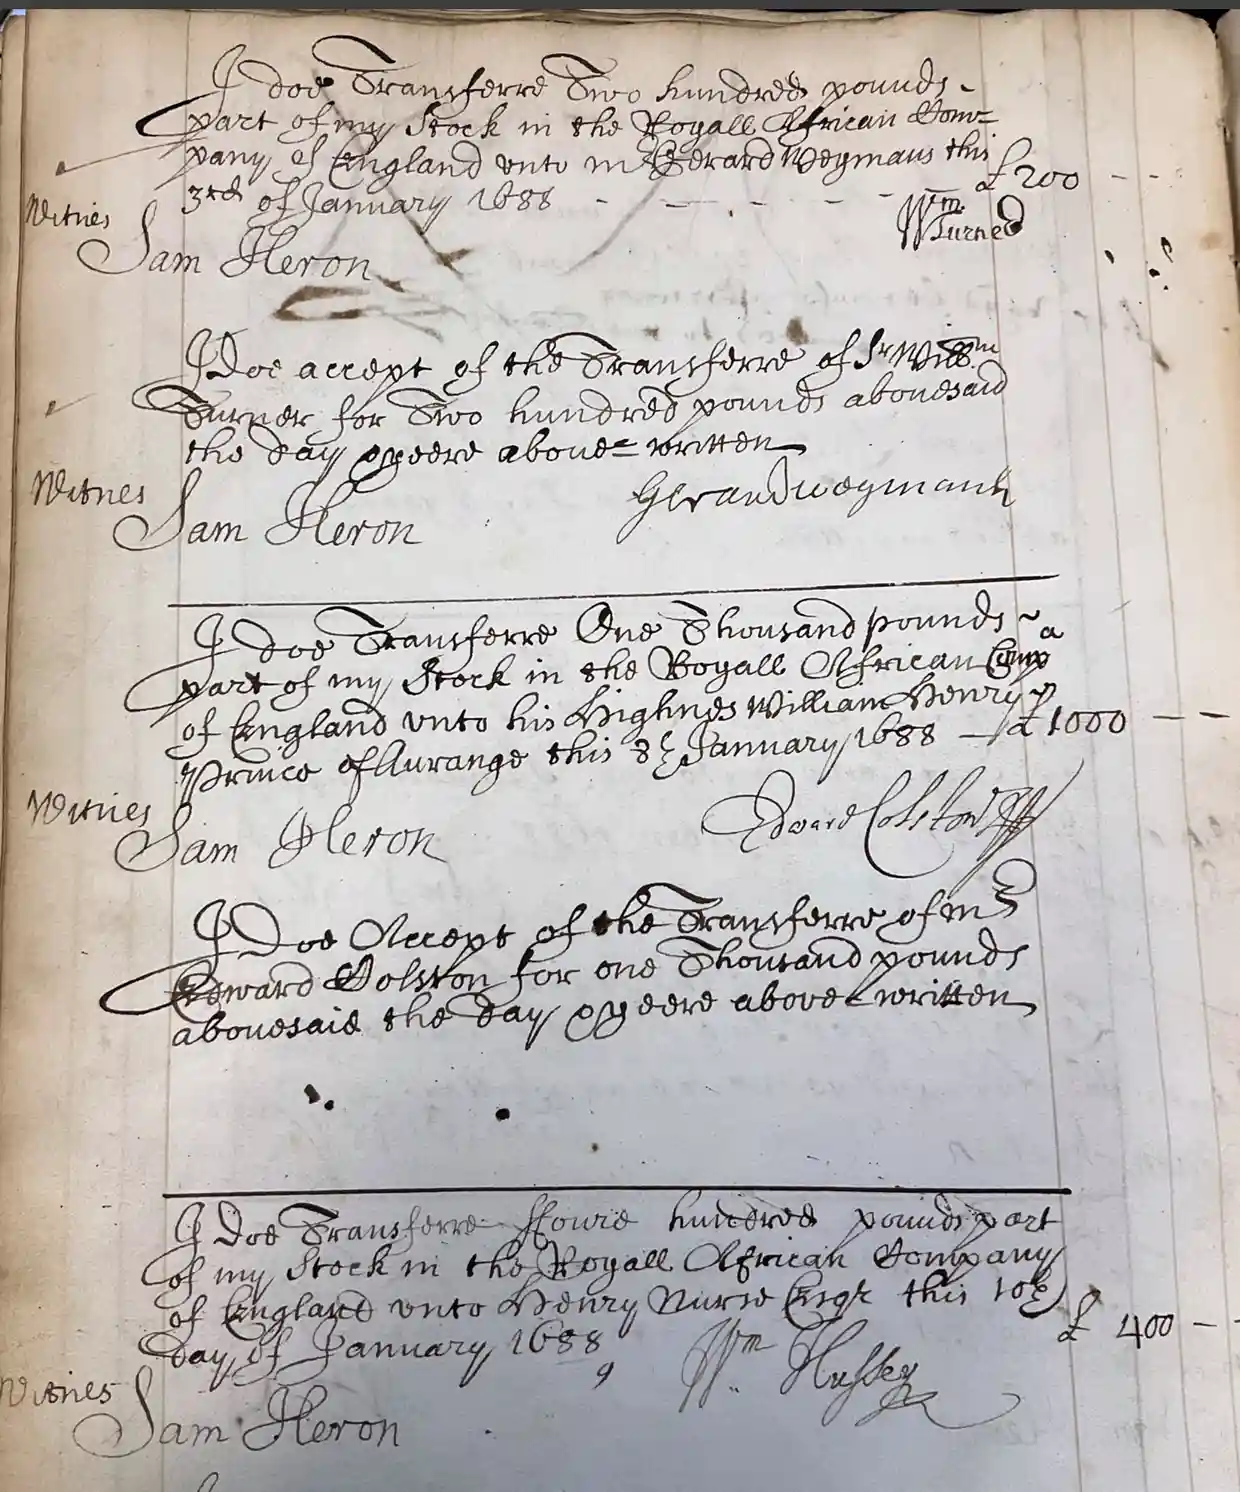 The document detailing the transfer of shares in the Royal African Company from Edward Colston to King William III. Click here to enlarge and save. Photograph: Brooke Newman/RAC archive/Public Record Office